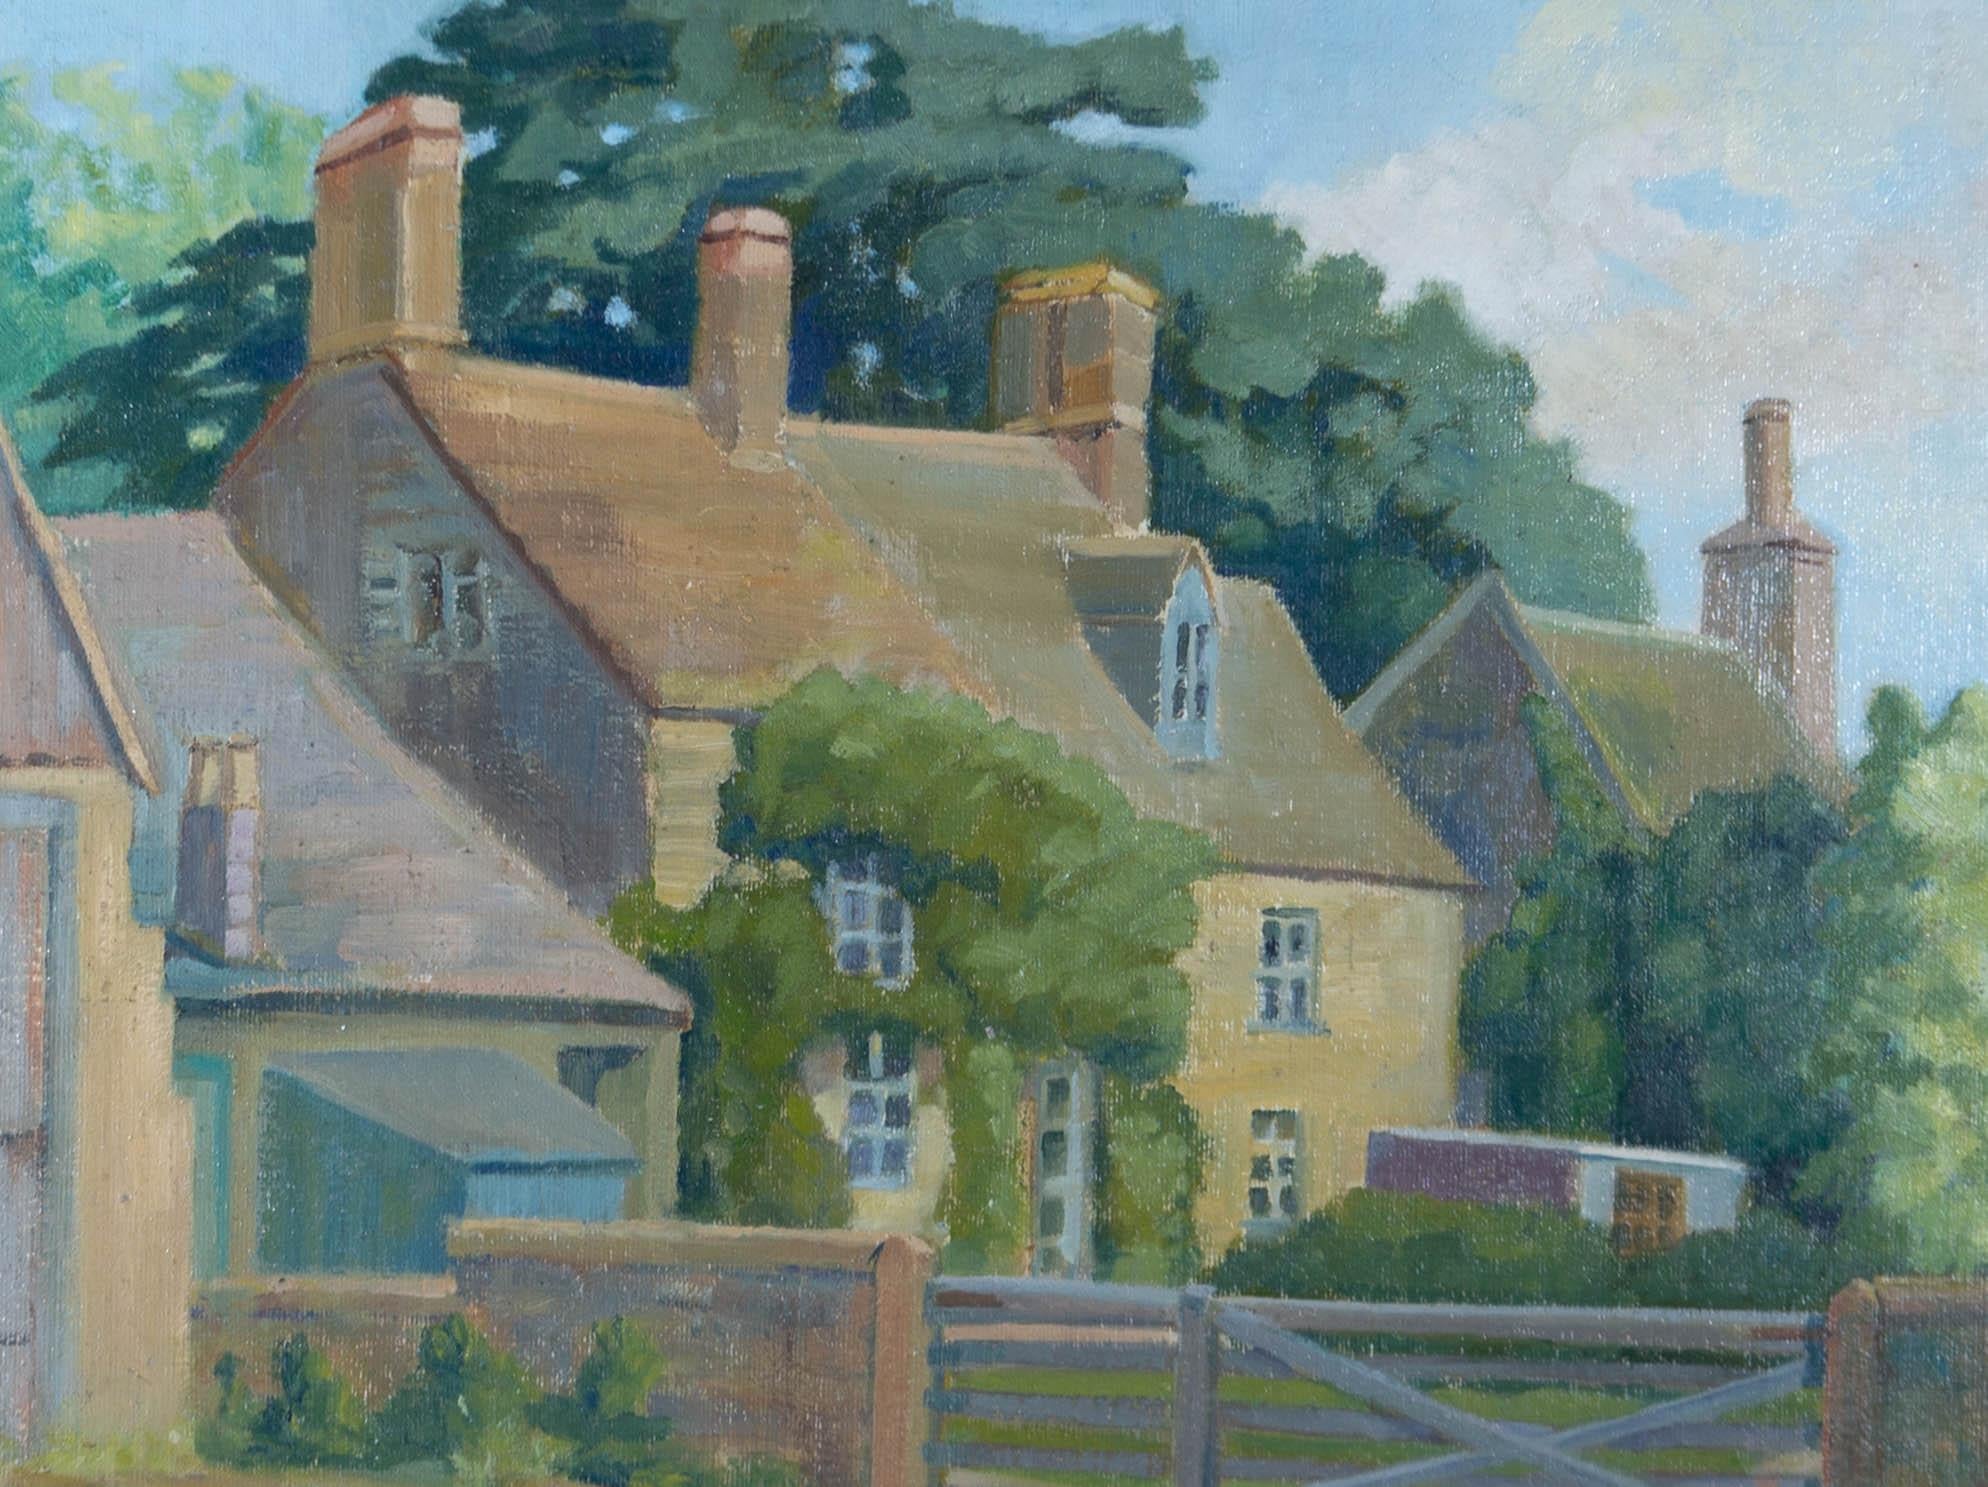 A wonderful study by Margaret McClean depicting a little English cottage with a front garden and ivy-covered facade. Presented in a distressed wood frame. Signed to the lower edge. On canvas board.
